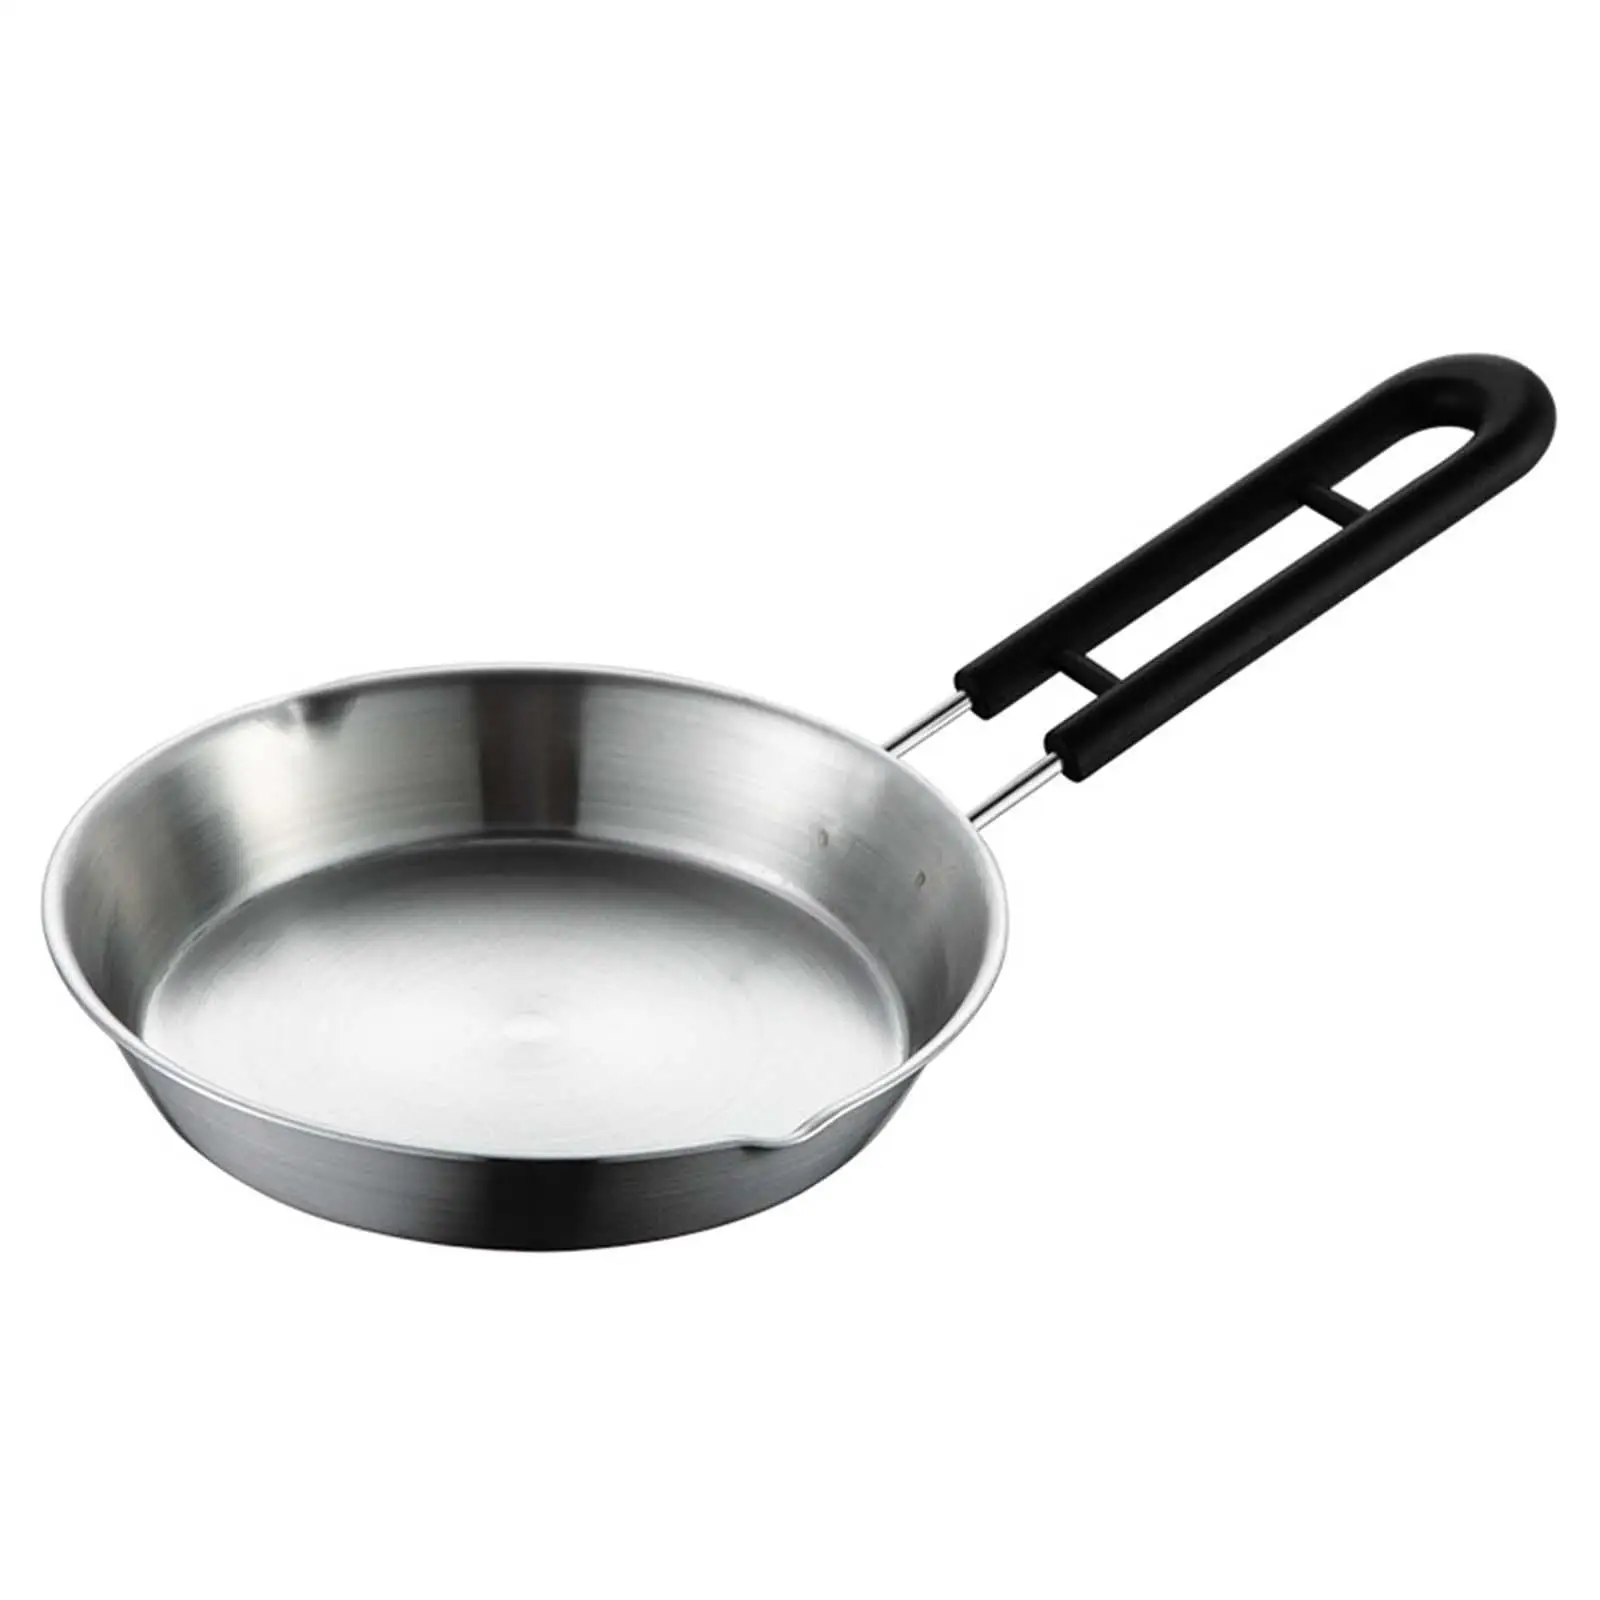 Mini Fry Pan Kitchen Cookware Melting Butter with Stay Handle Cooking Wok for Kitchen Gas Stove Induction Cooker Outdoor Camping